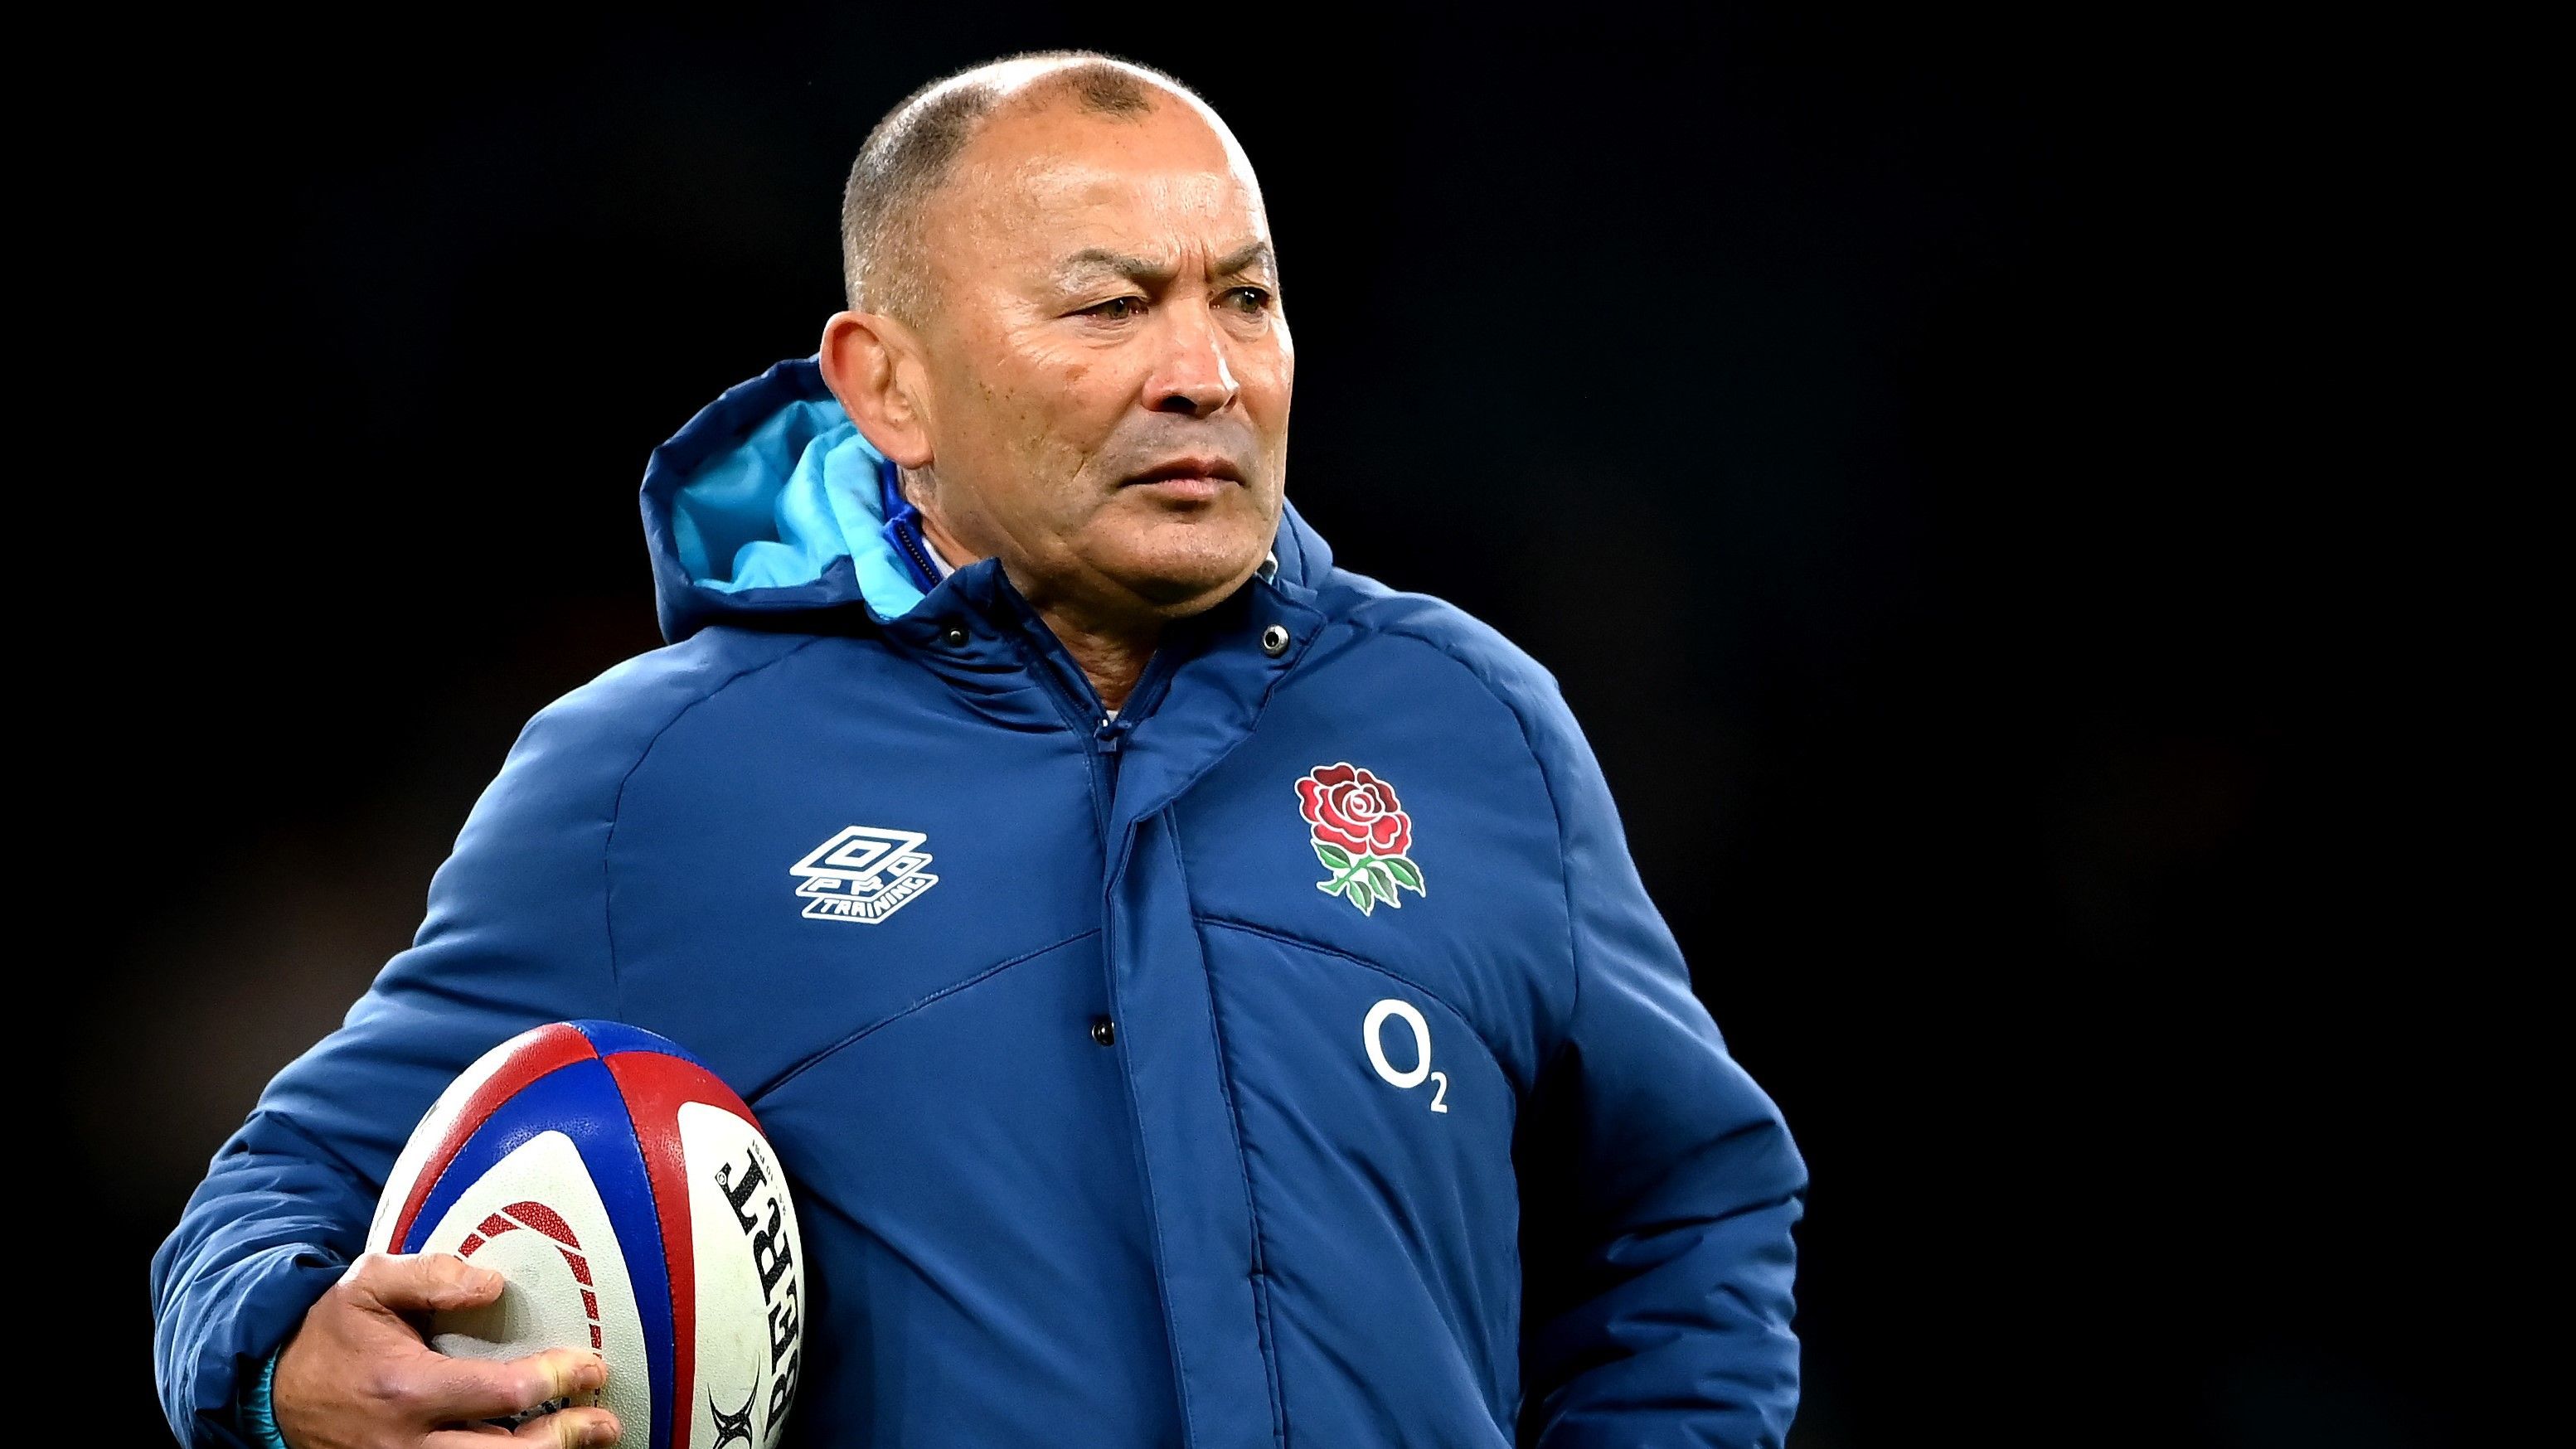 Eddie Jones was finally removed from his station as England coach on Tuesday.